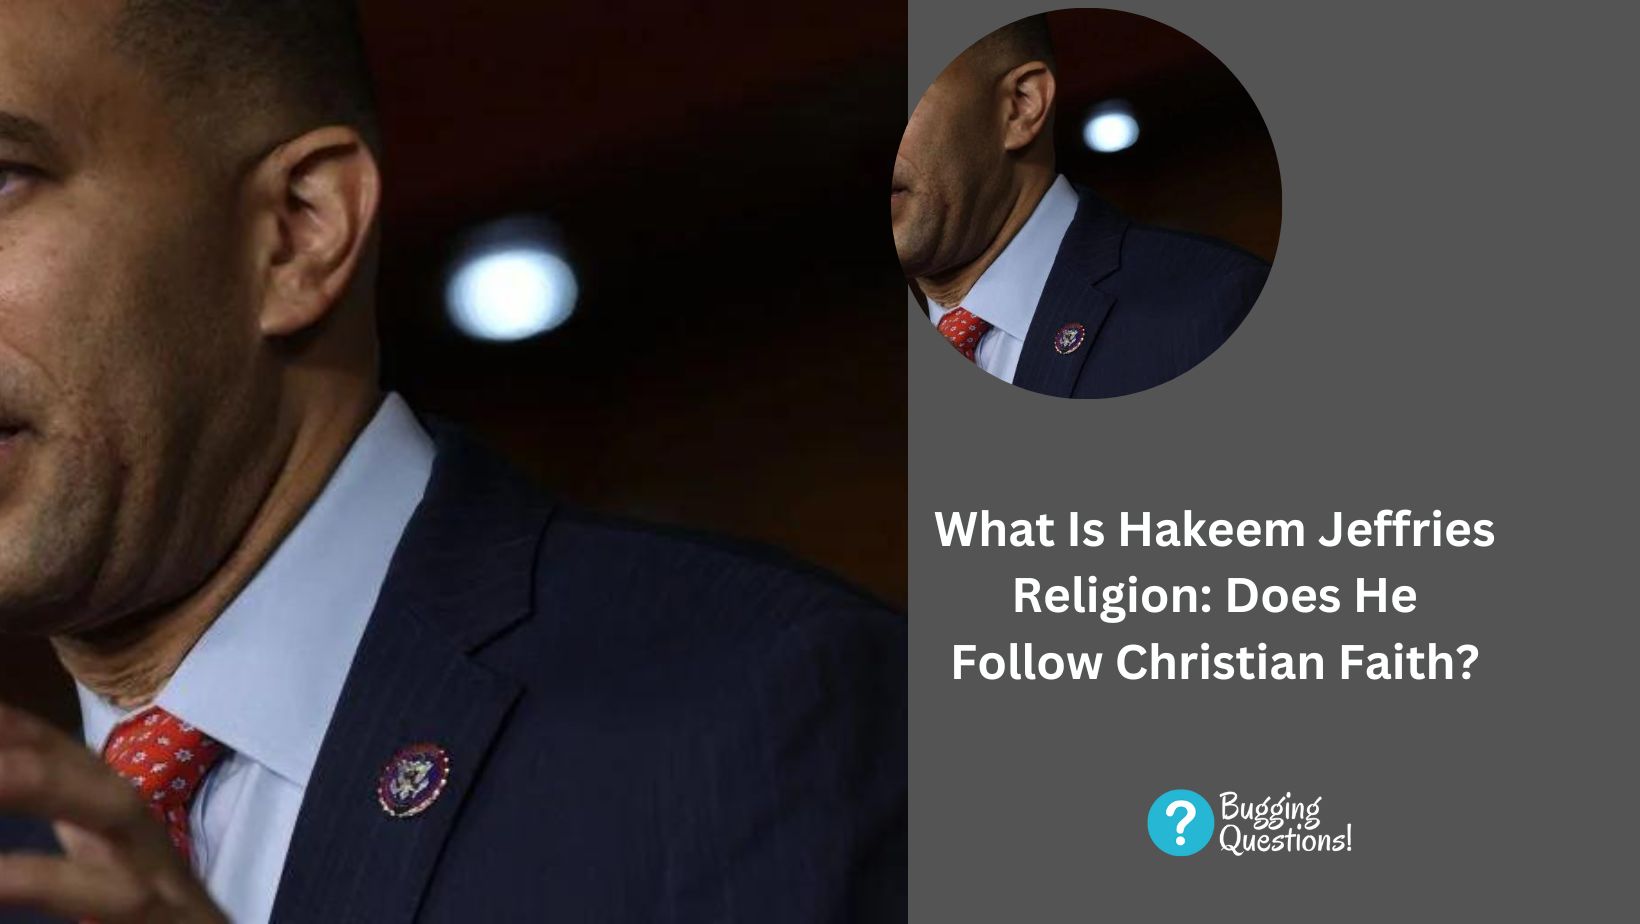 What Is Hakeem Jeffries Religion: Does He Follow Christian Faith?